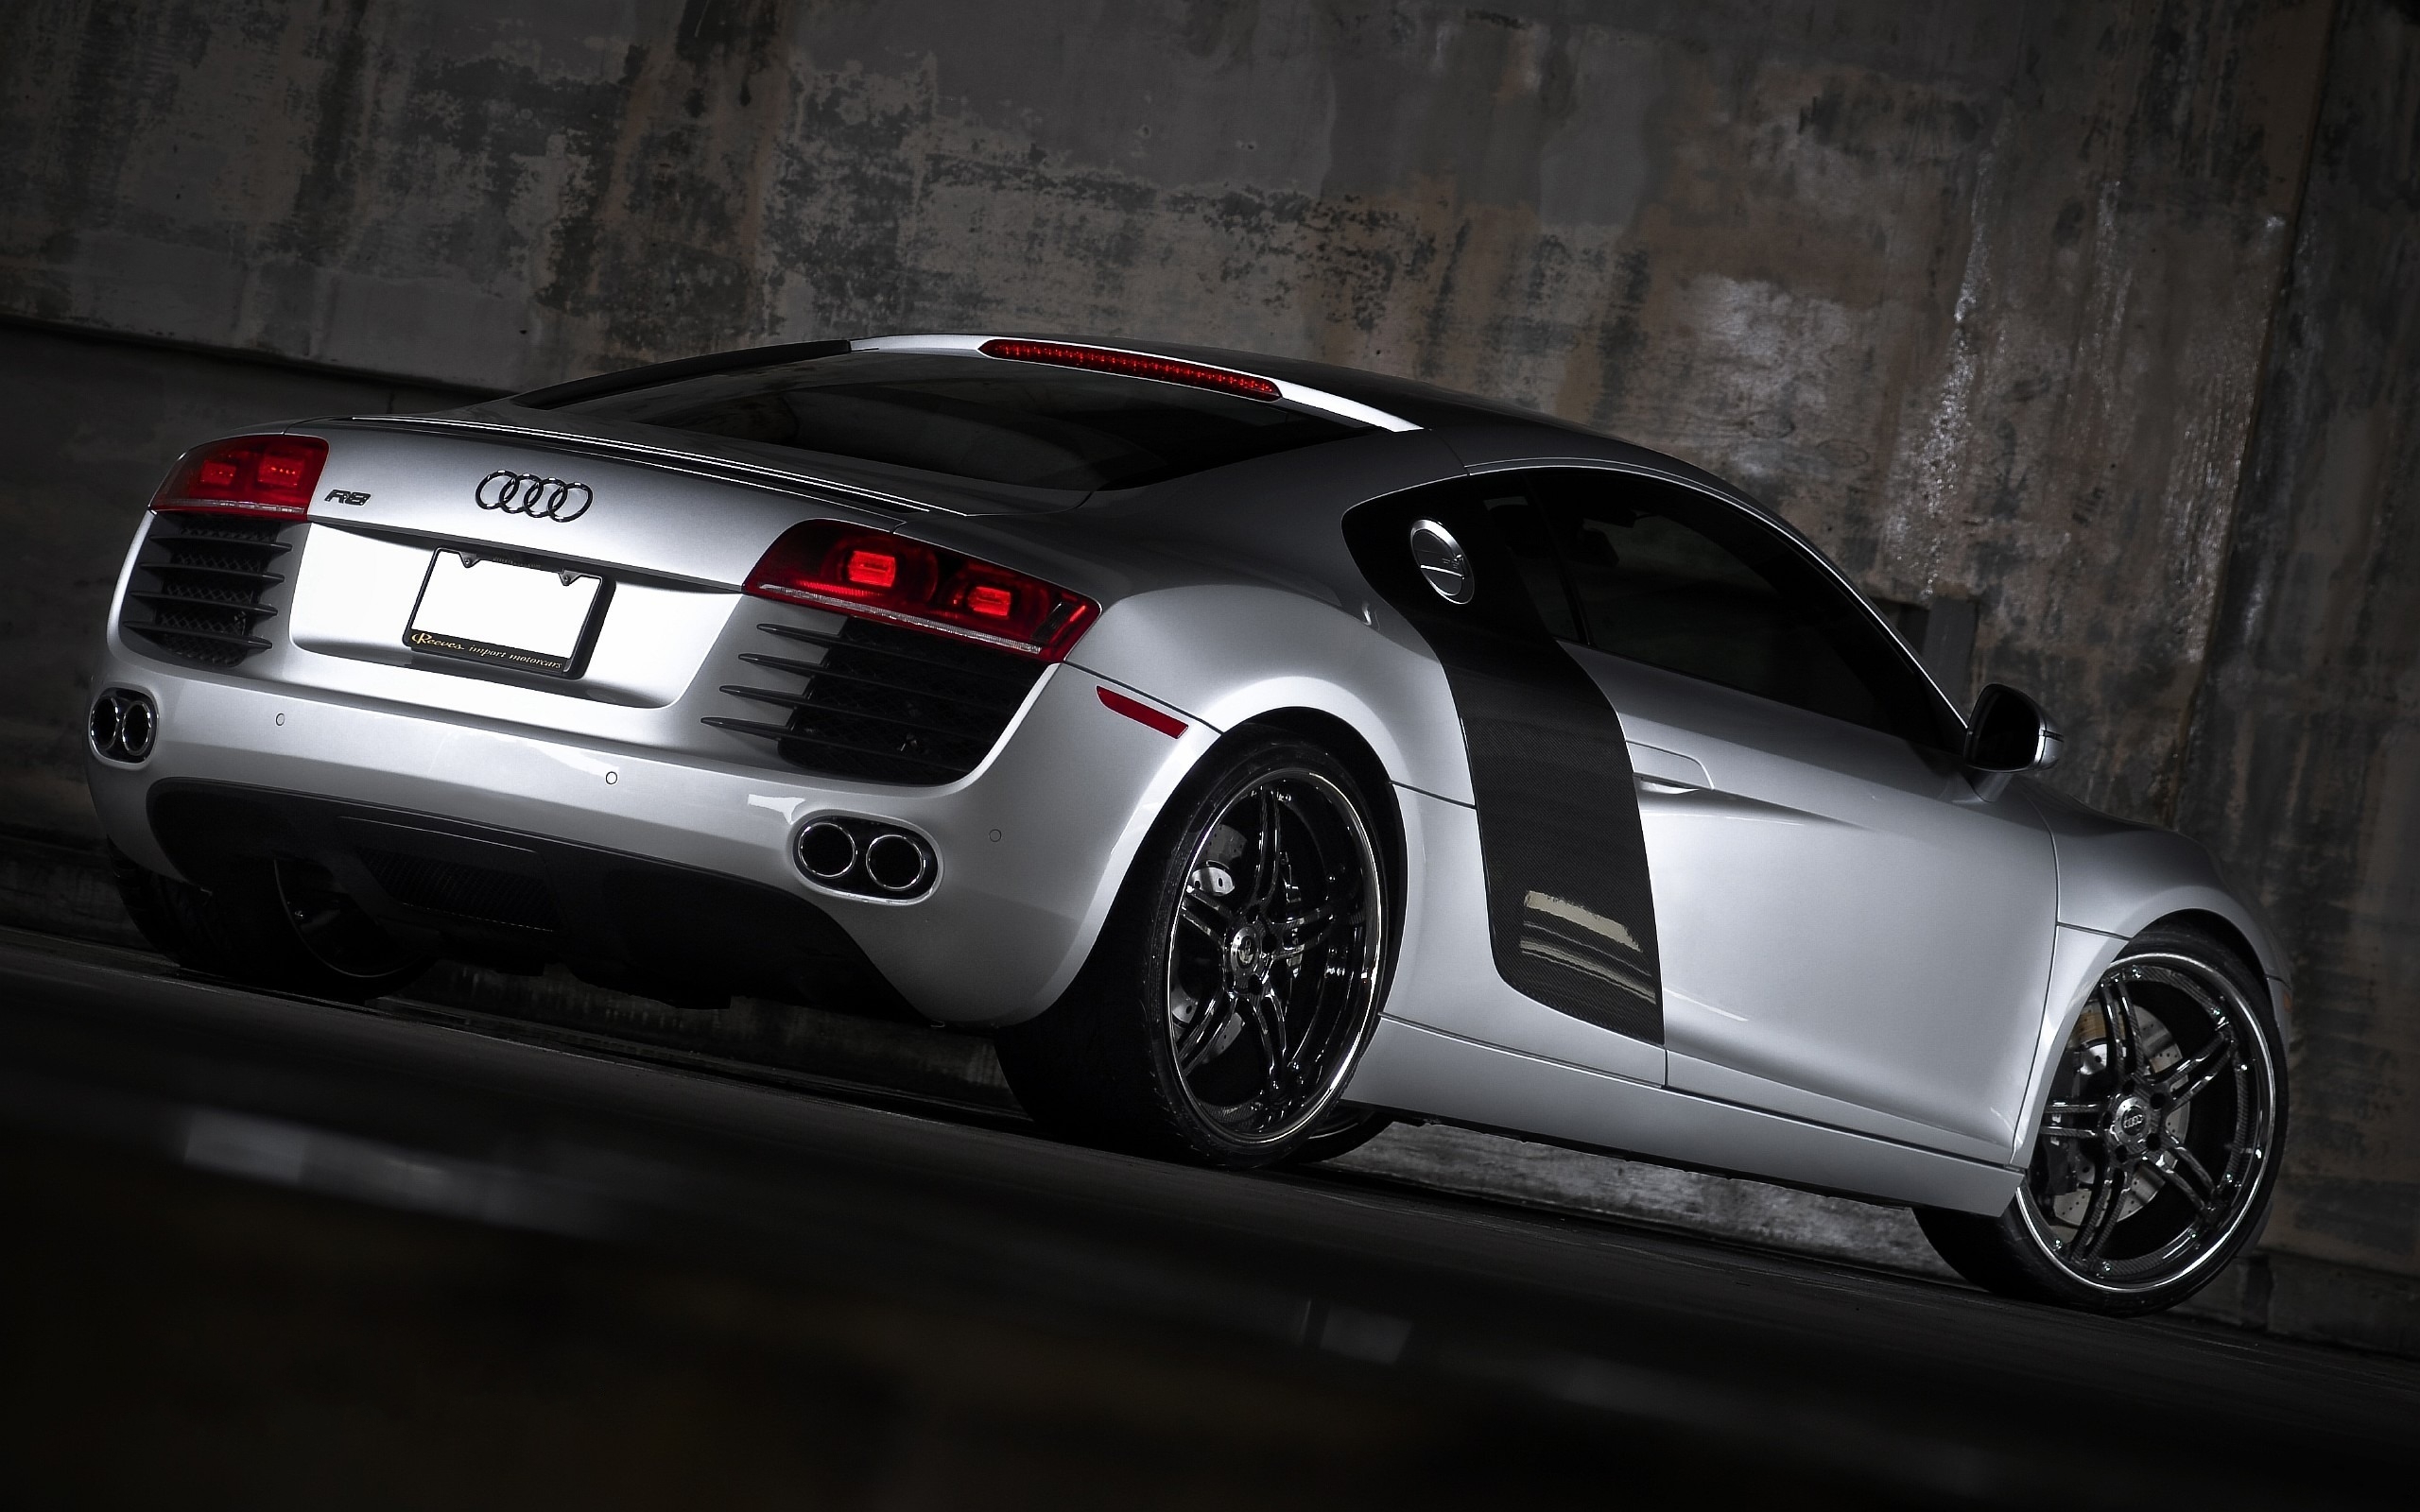 185 Audi R8 HD Wallpapers | Backgrounds - Wallpaper Abyss